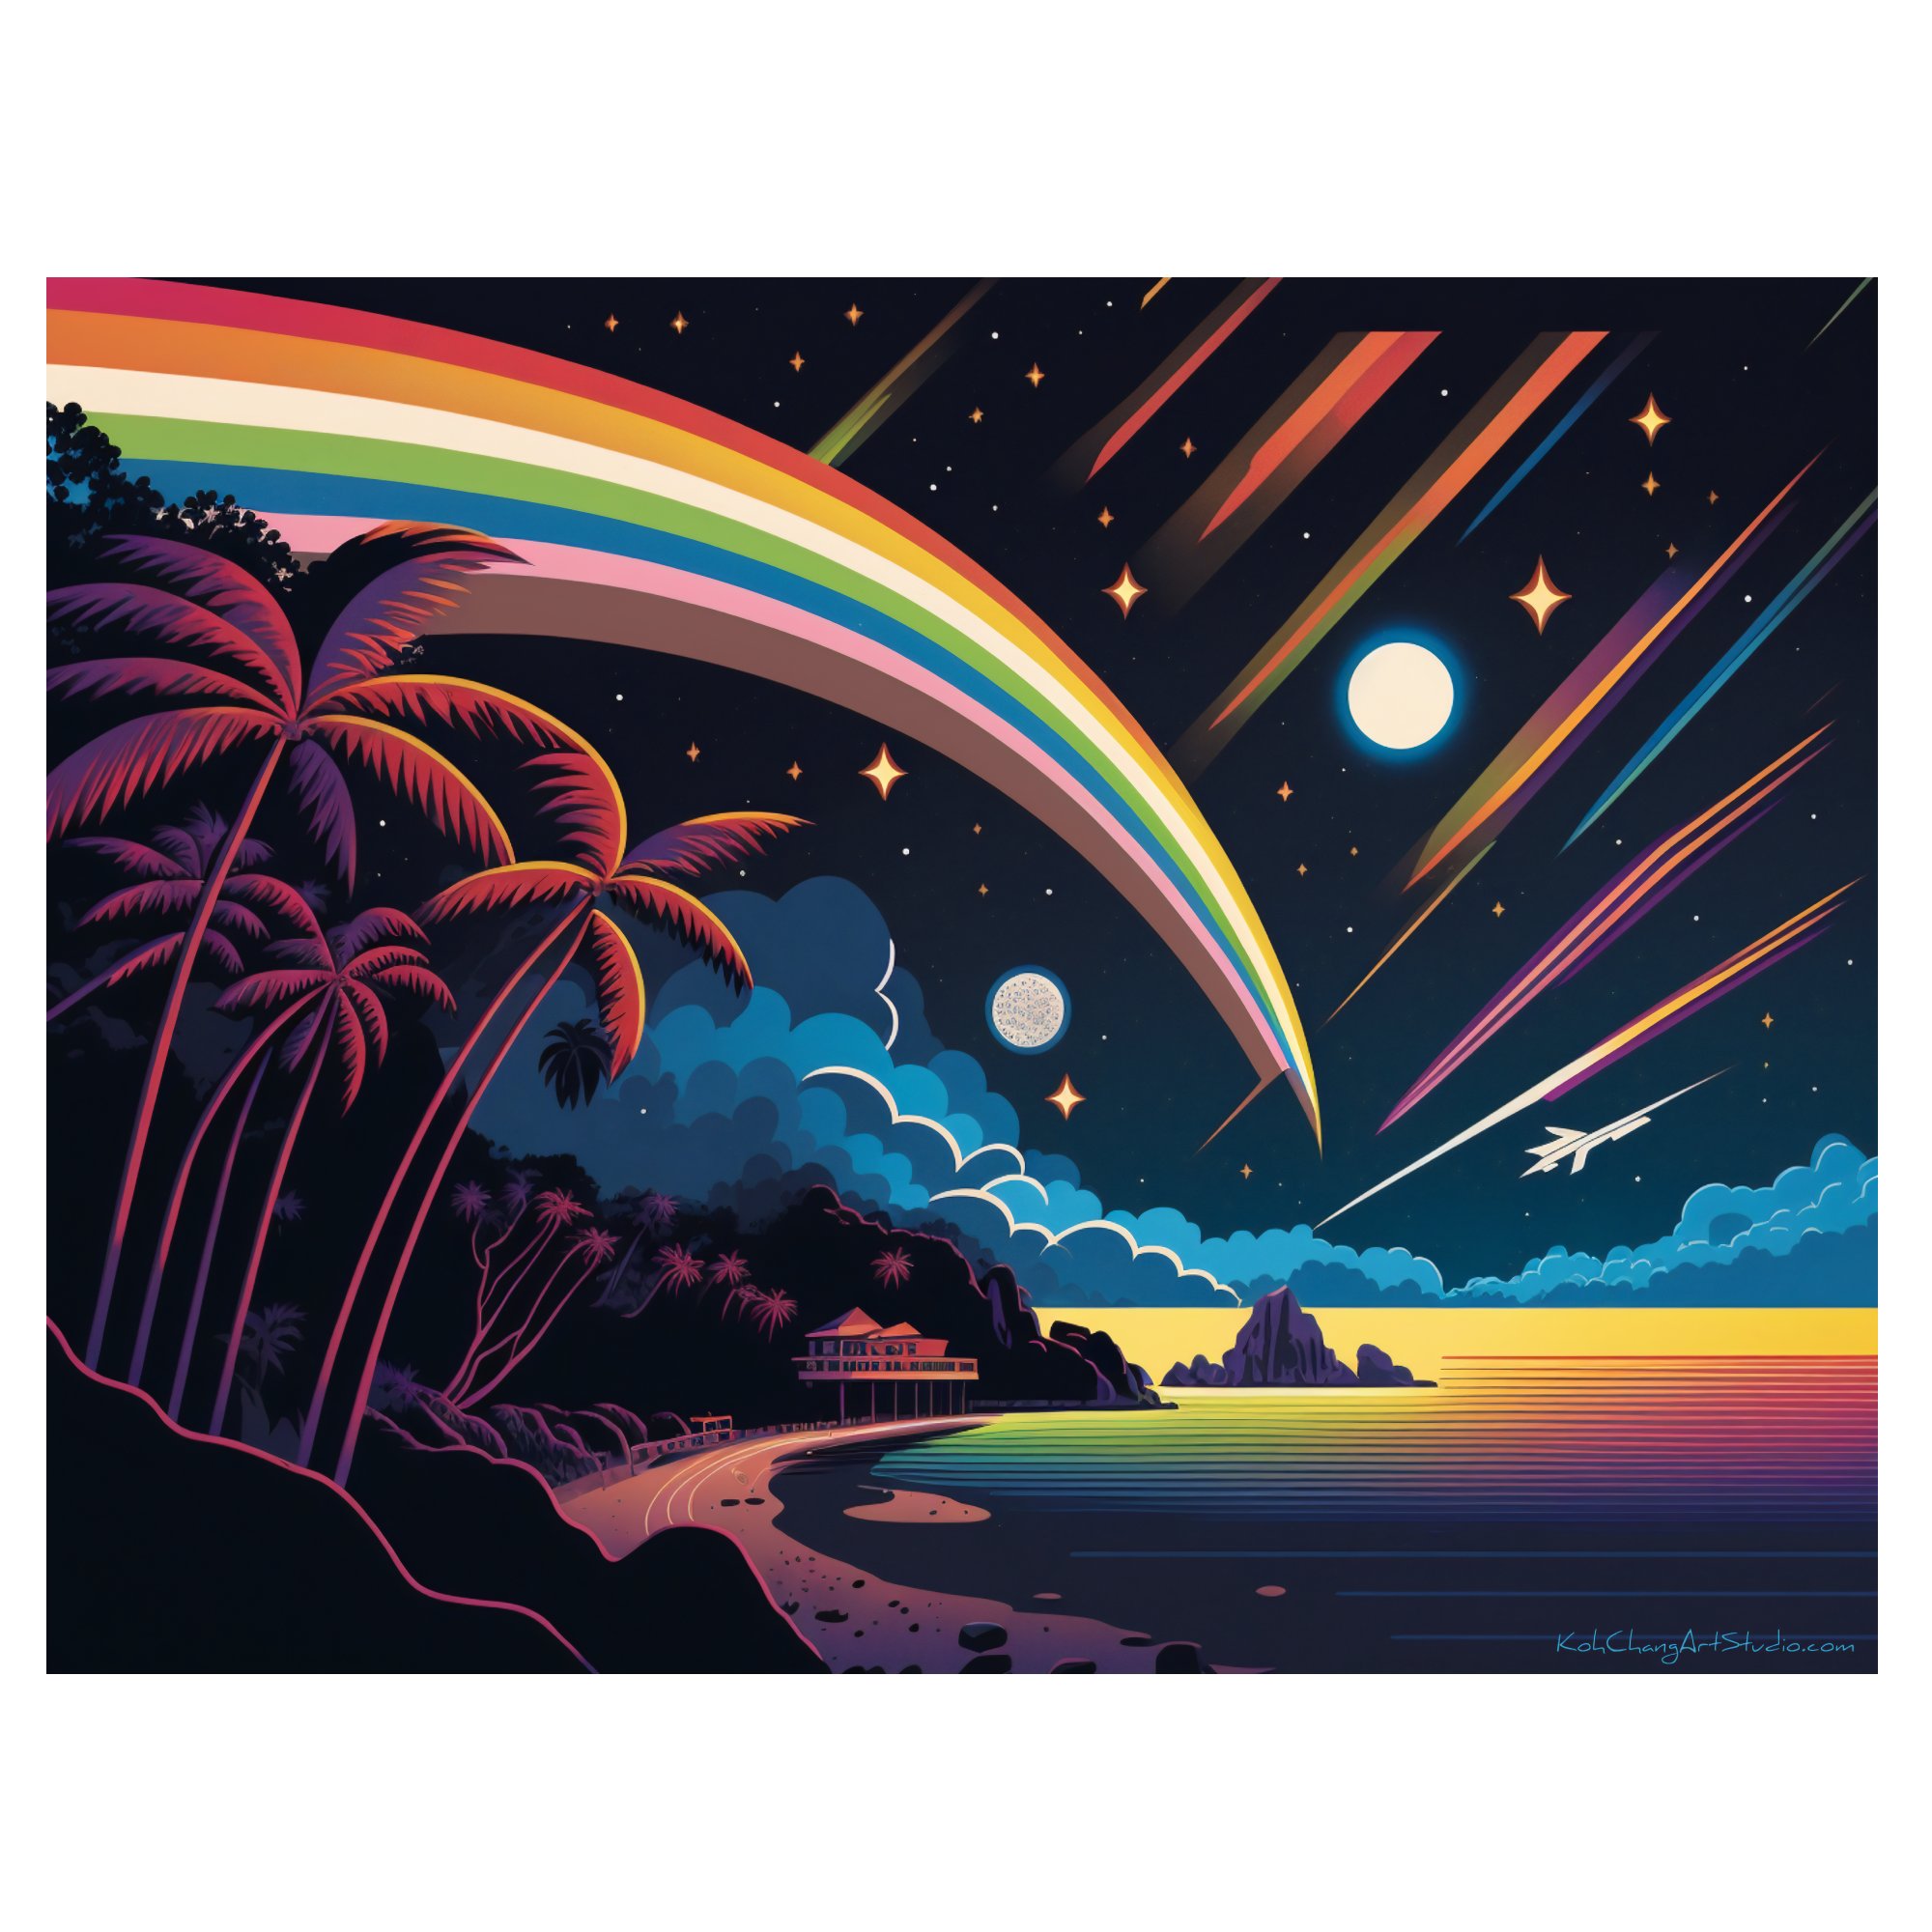 OASIS ORBIT Artistic Depiction - Nighttime rainbow bridging reality and dreams beneath twin moons.